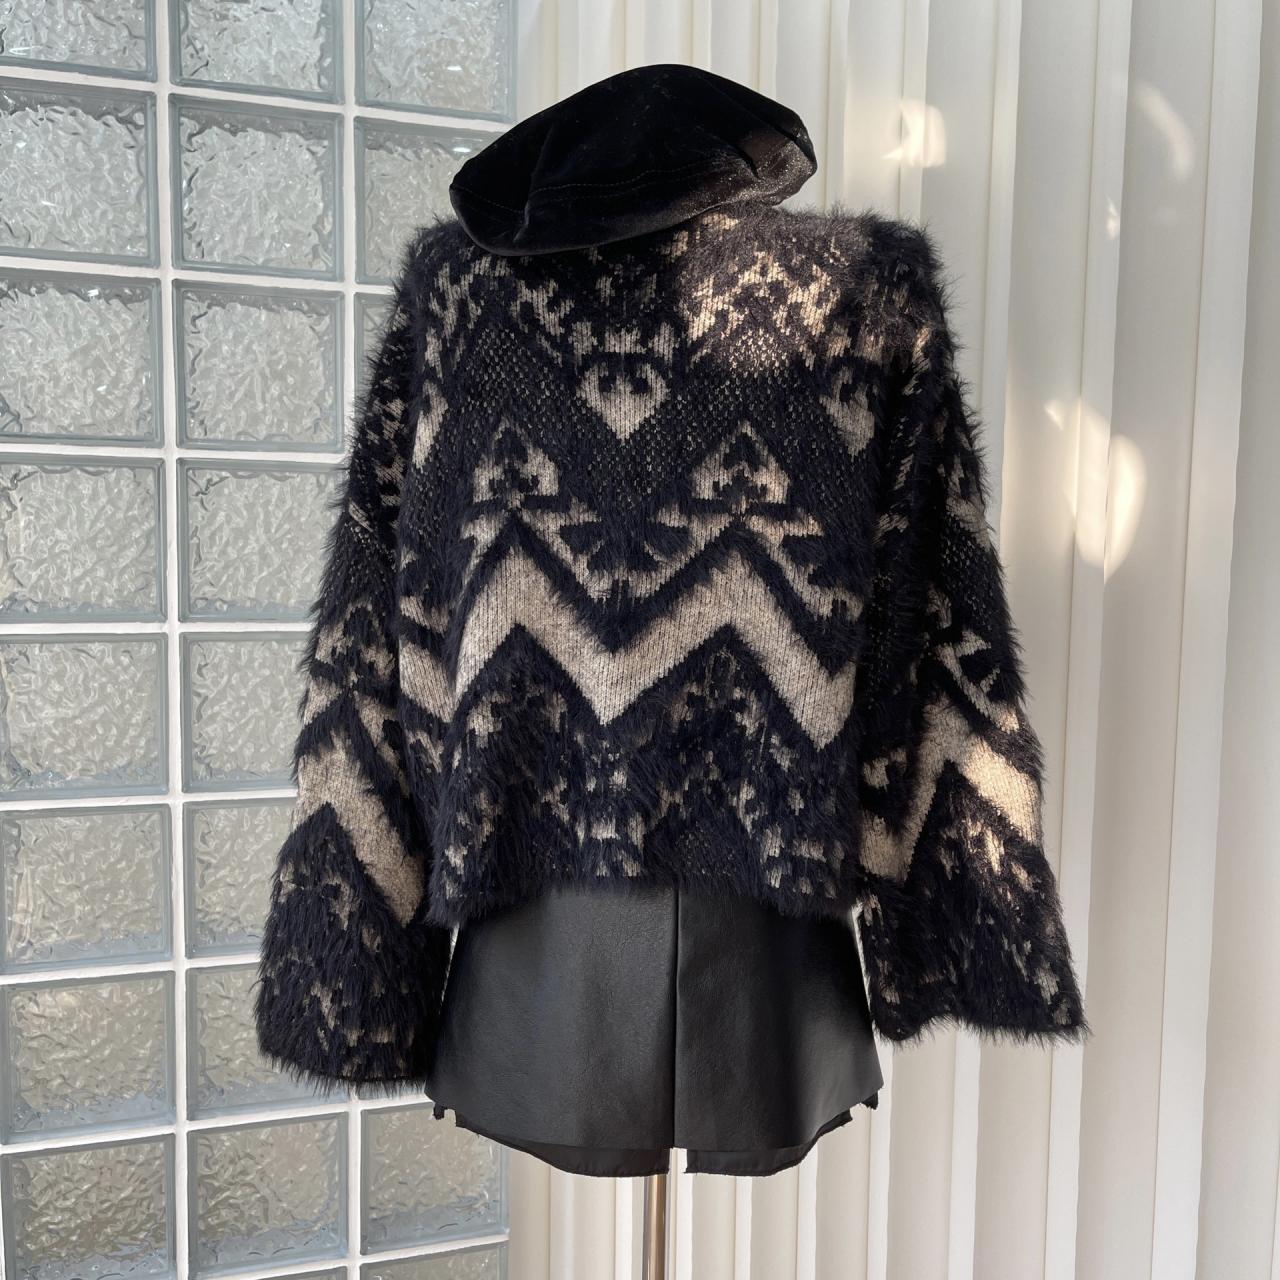 Lace Imitation Mink Hair Design Sense Of Women's Sweater Women Autumn And Winter Loose Lazy Wind Outside To Wear A Top